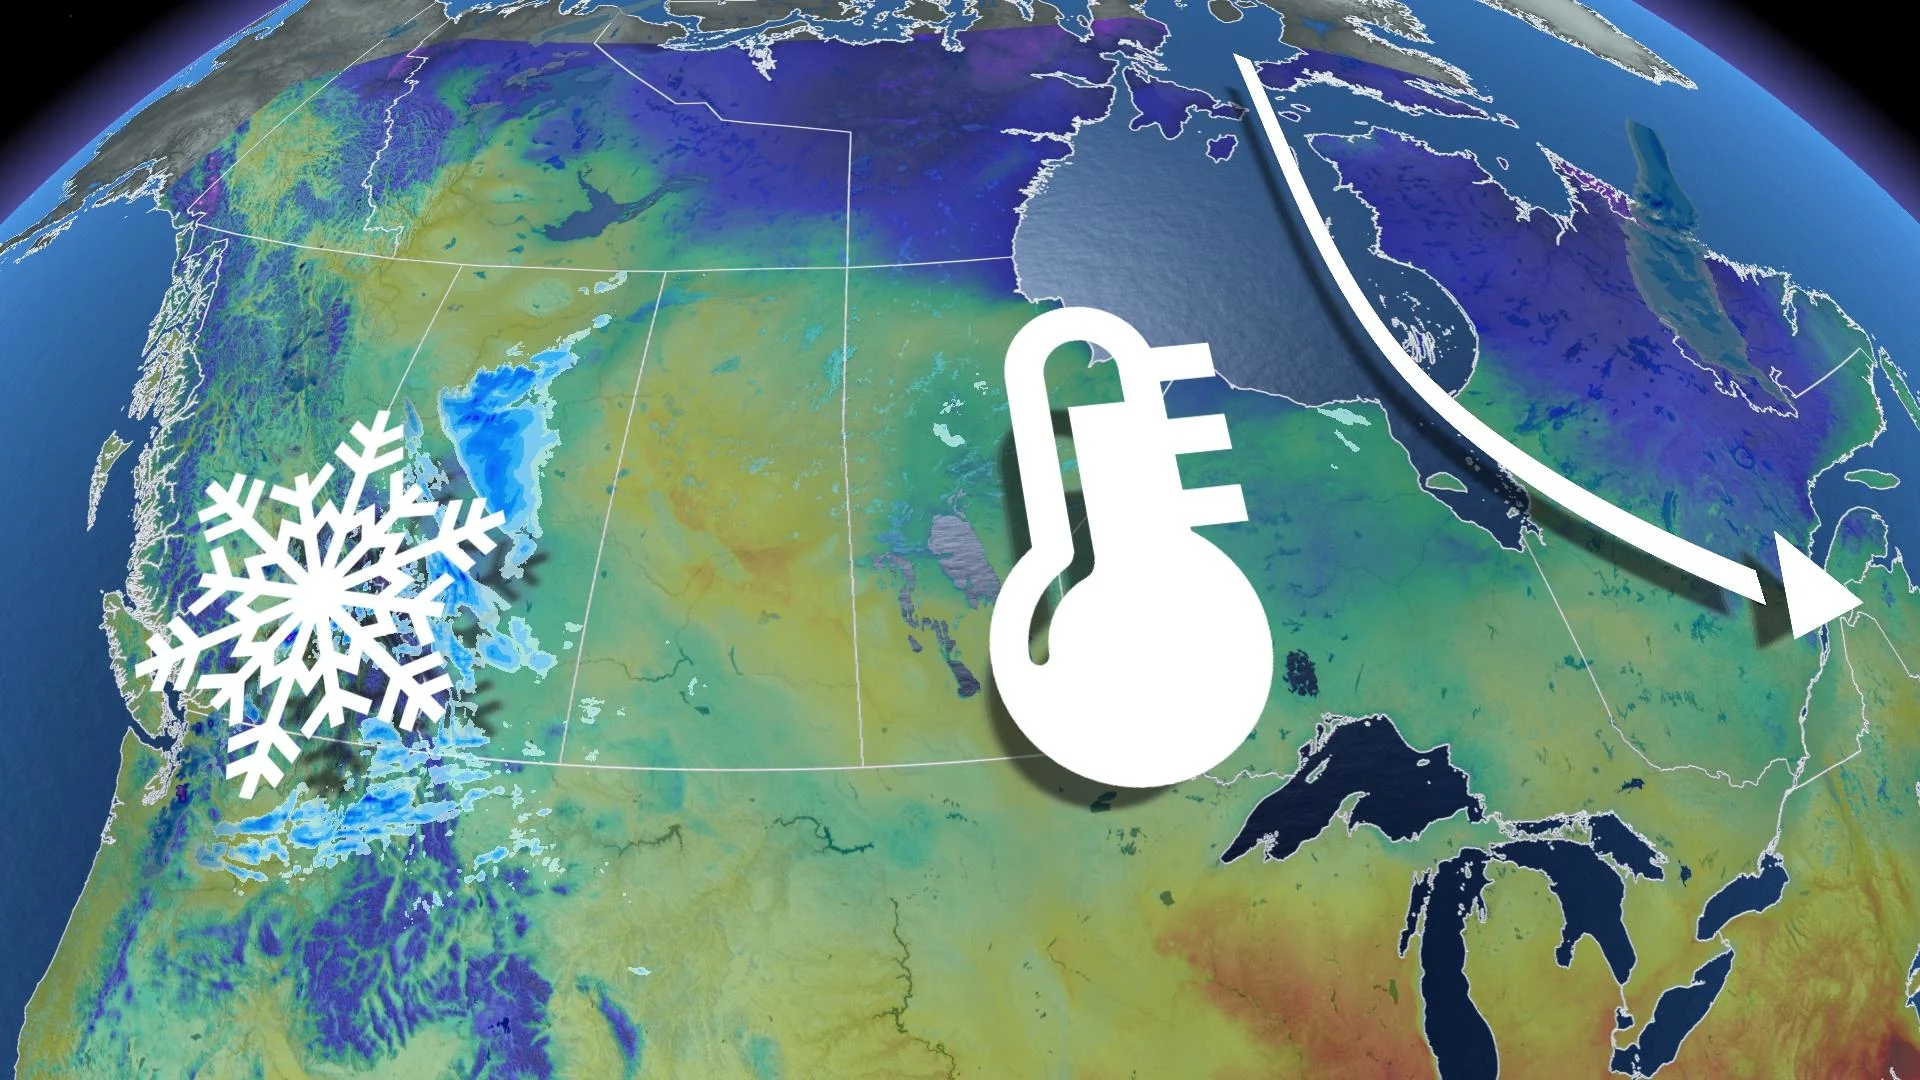 May outlook: Spring into summer or a stalling spring ahead, Canada?